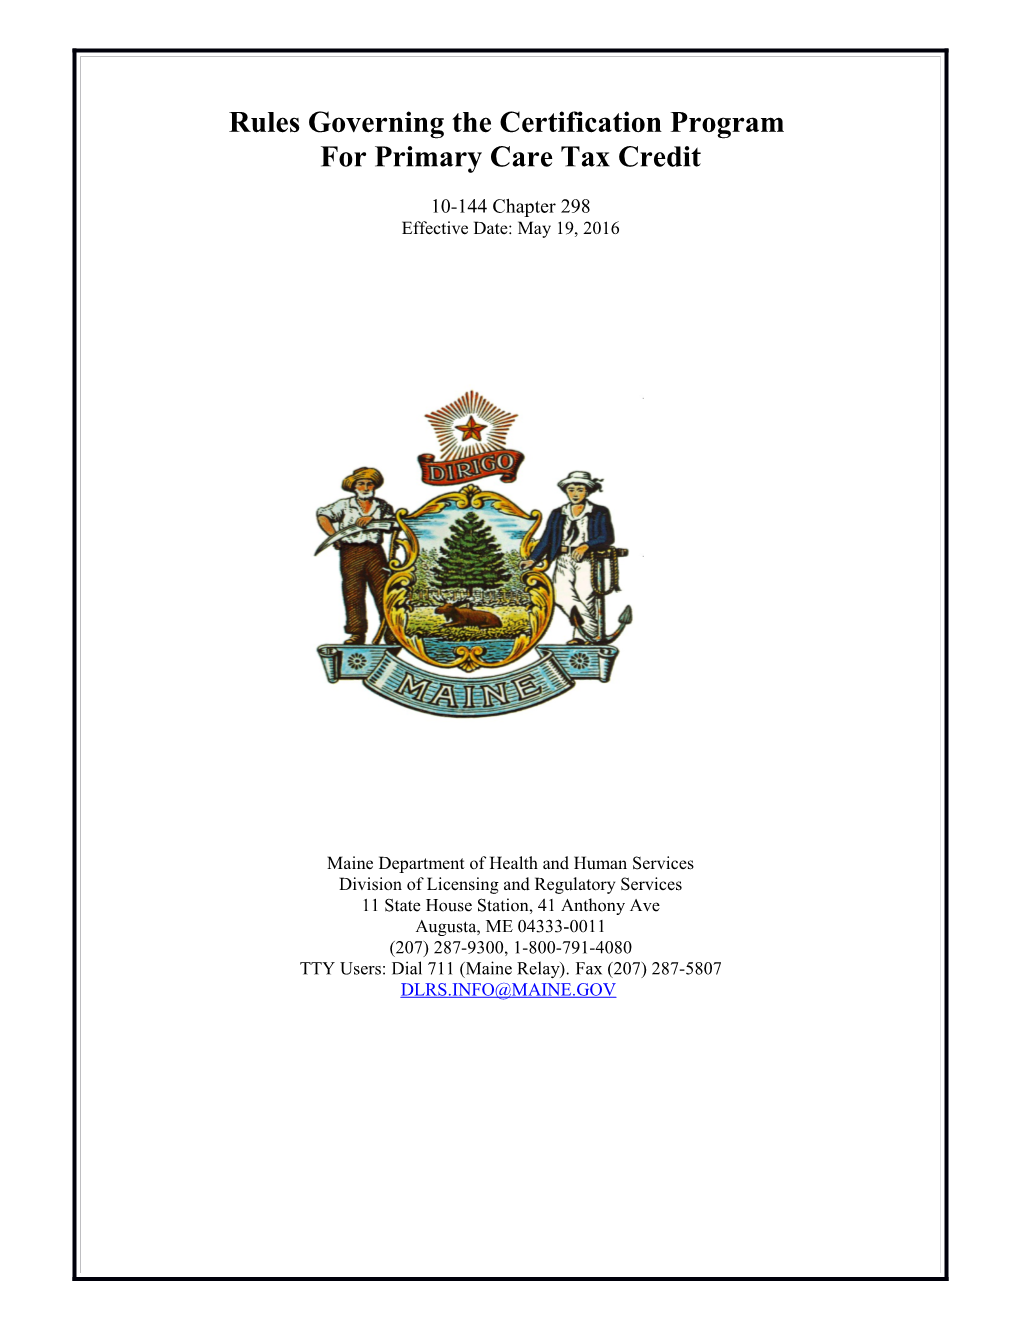 10-144 Chapter 298 - Rules Governing the Certification Program for Primary Care Tax Credit